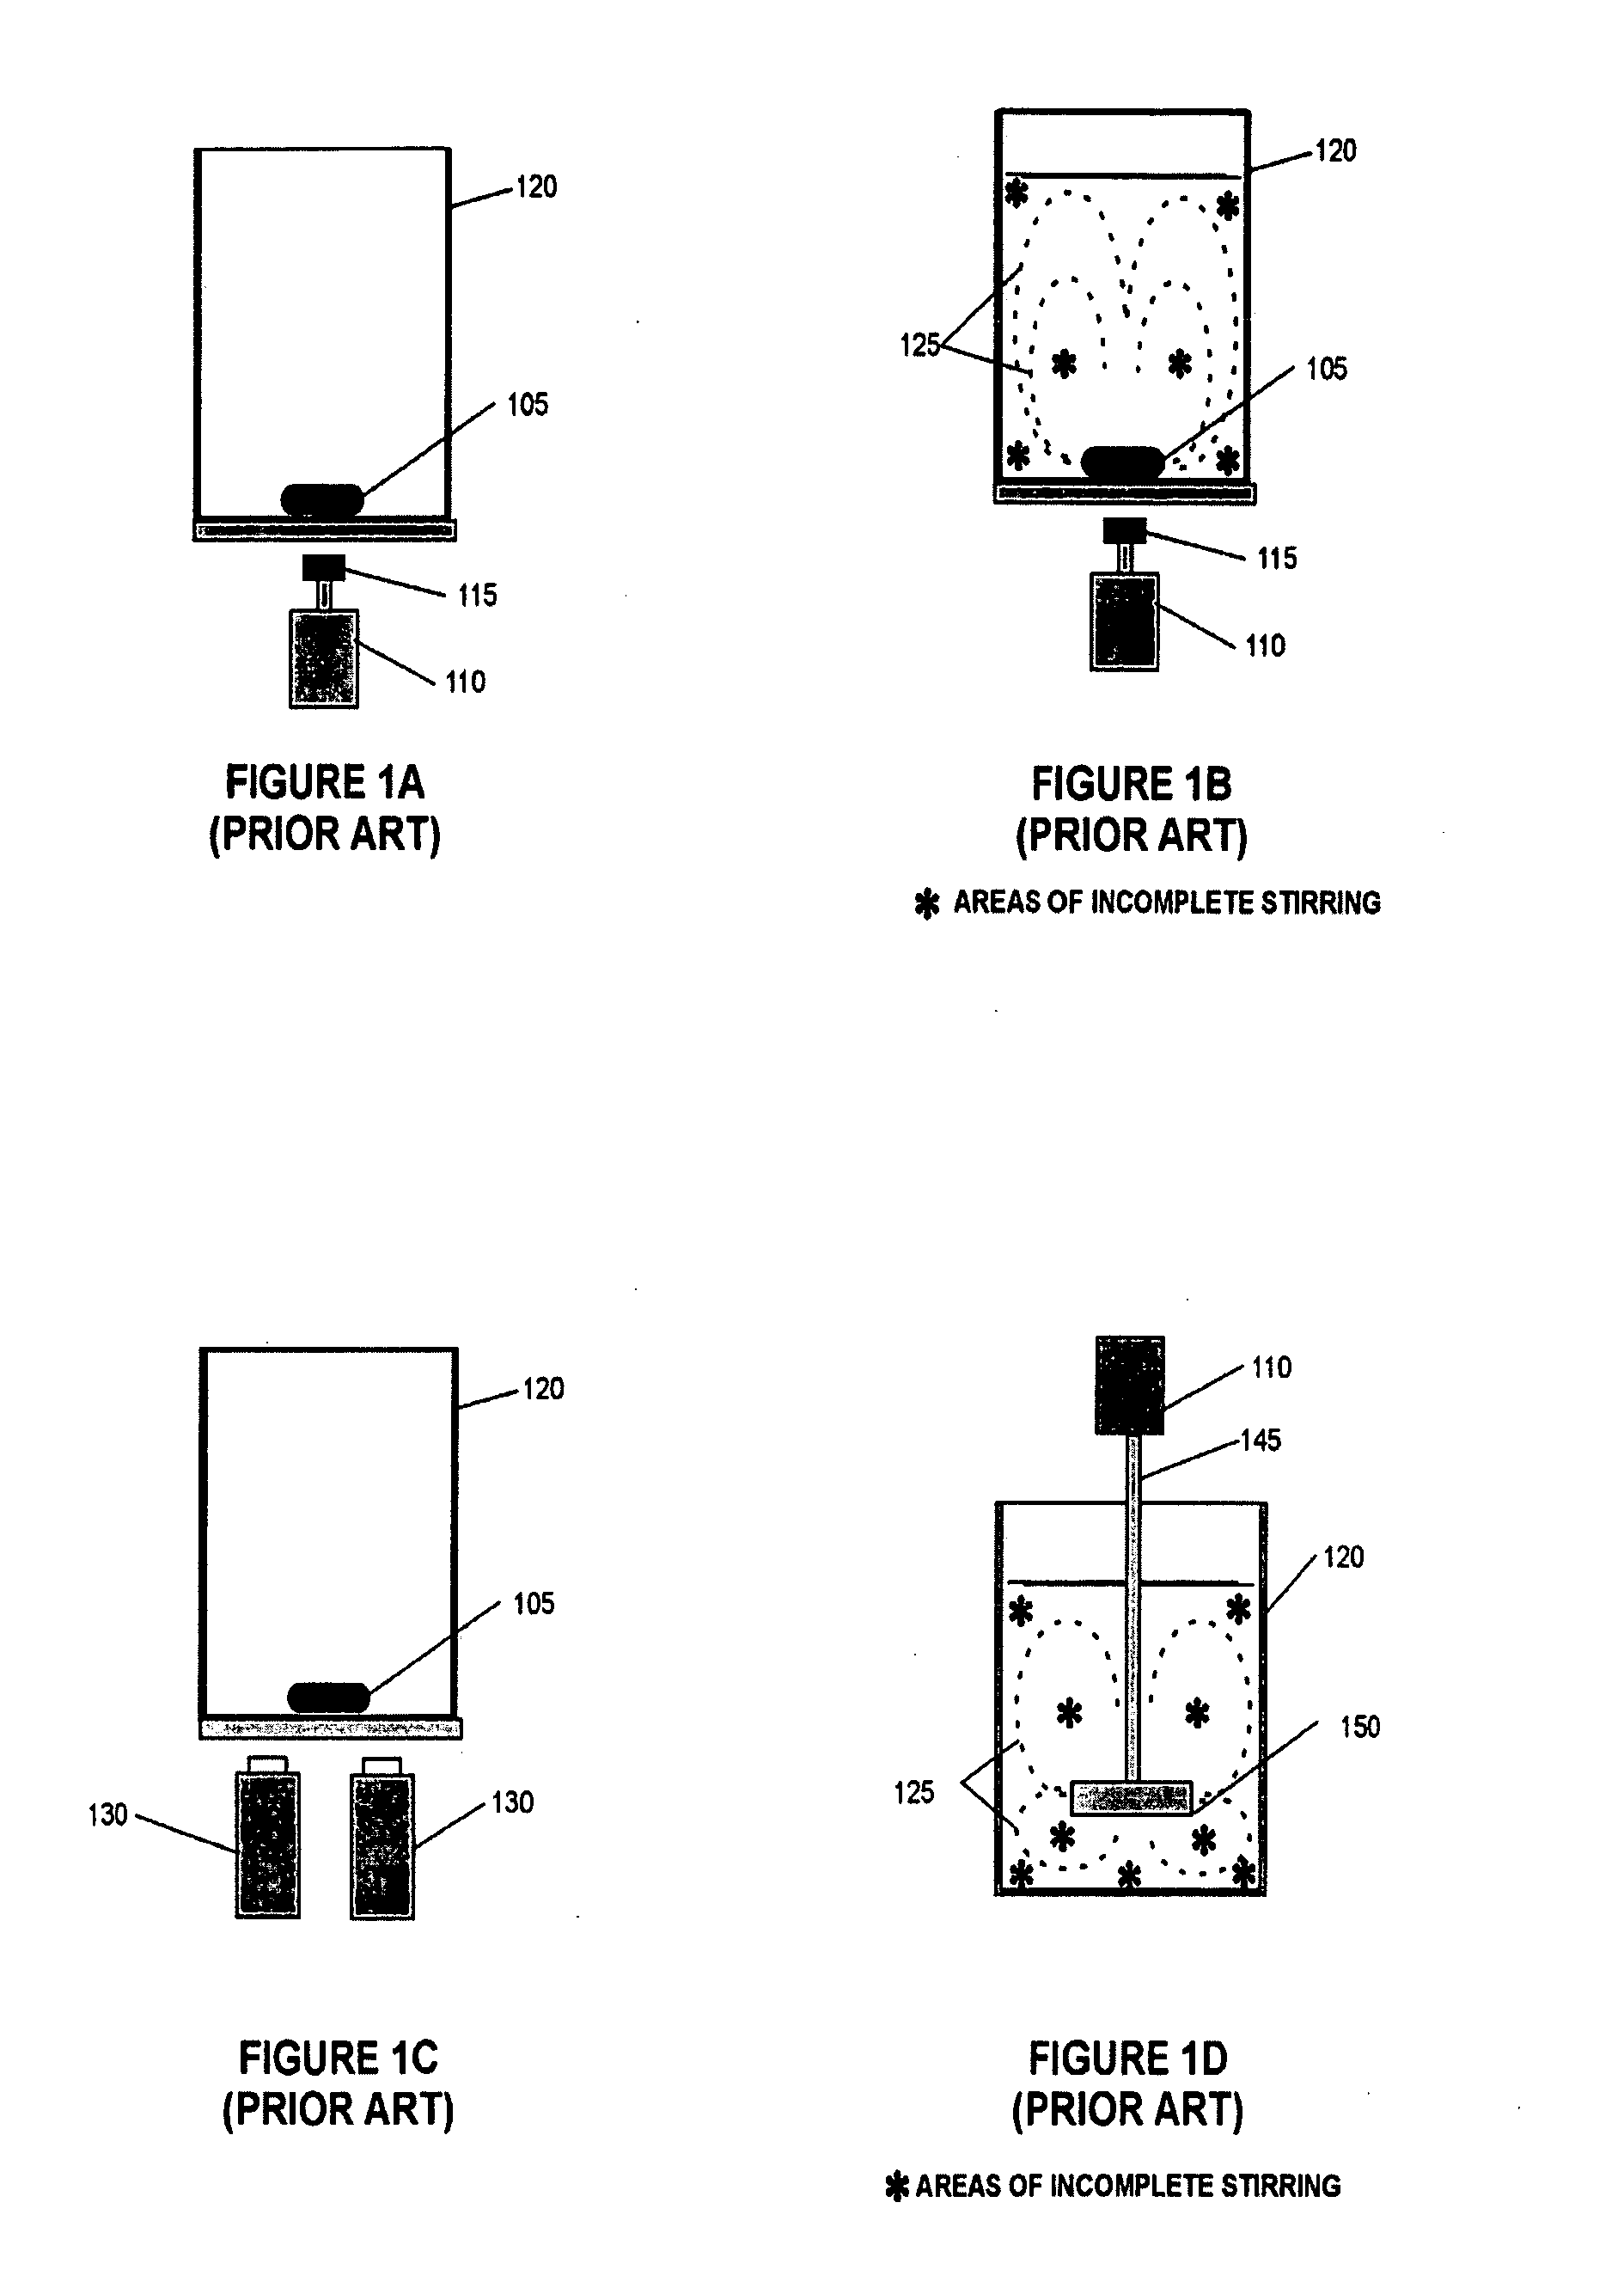 Method and apparatus for using vertical magnetic stirring to produce turbulent and chaotic mixing in various states, without compromising components